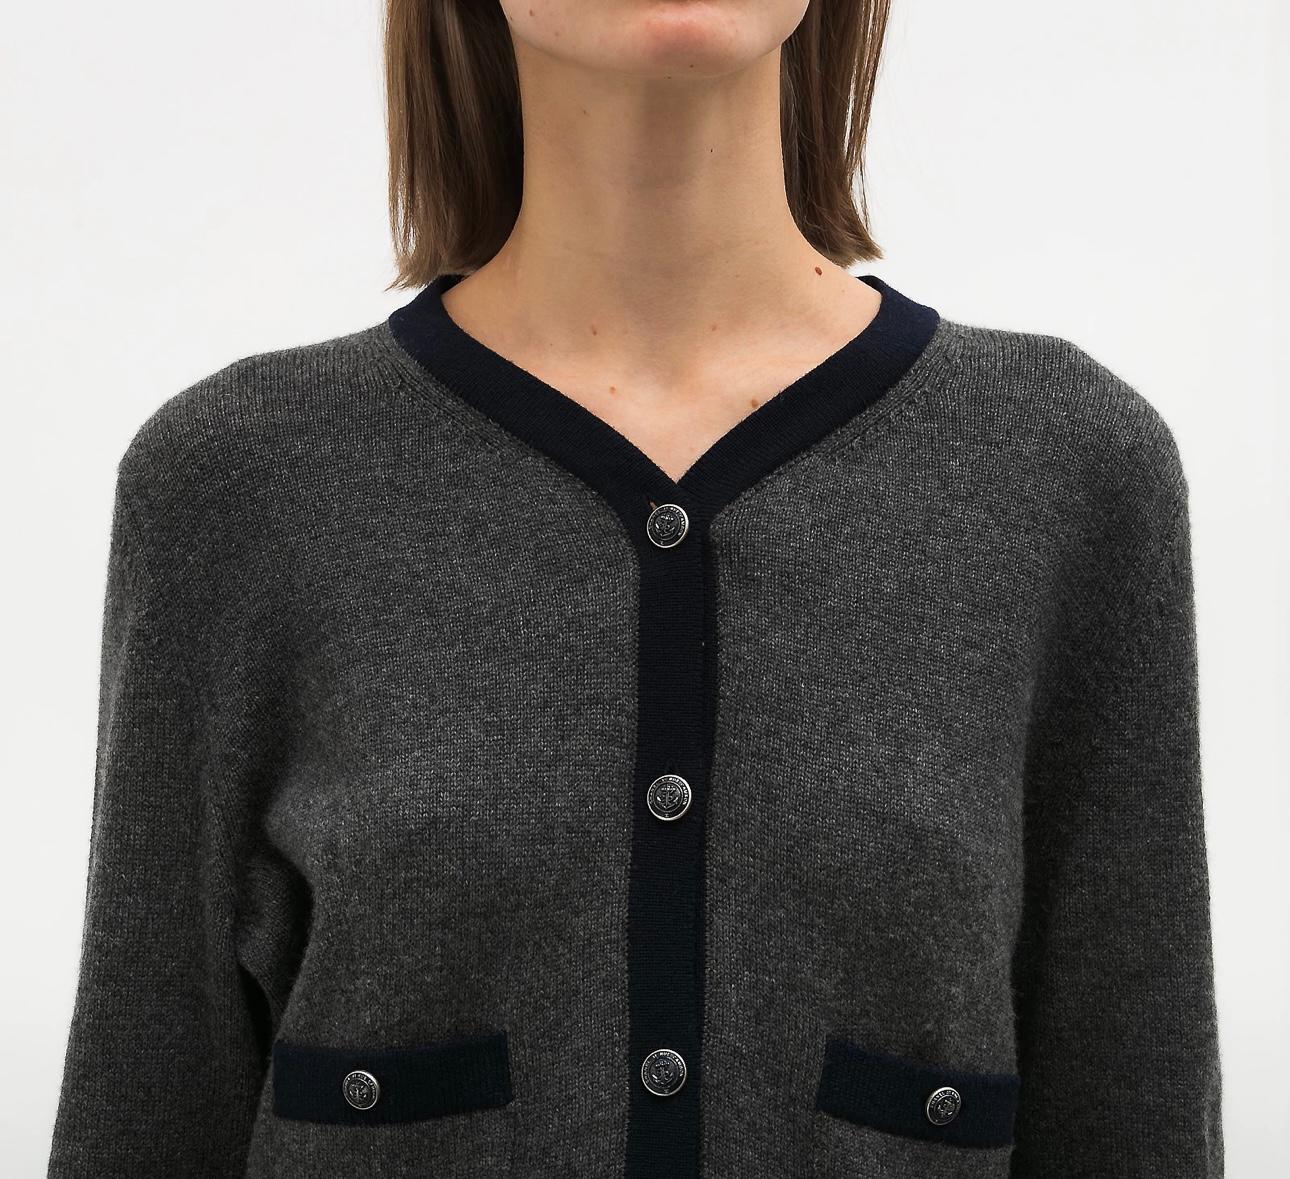 Chanel Iconic Sophie Coppola Style Cashmere Jacket For Sale 3